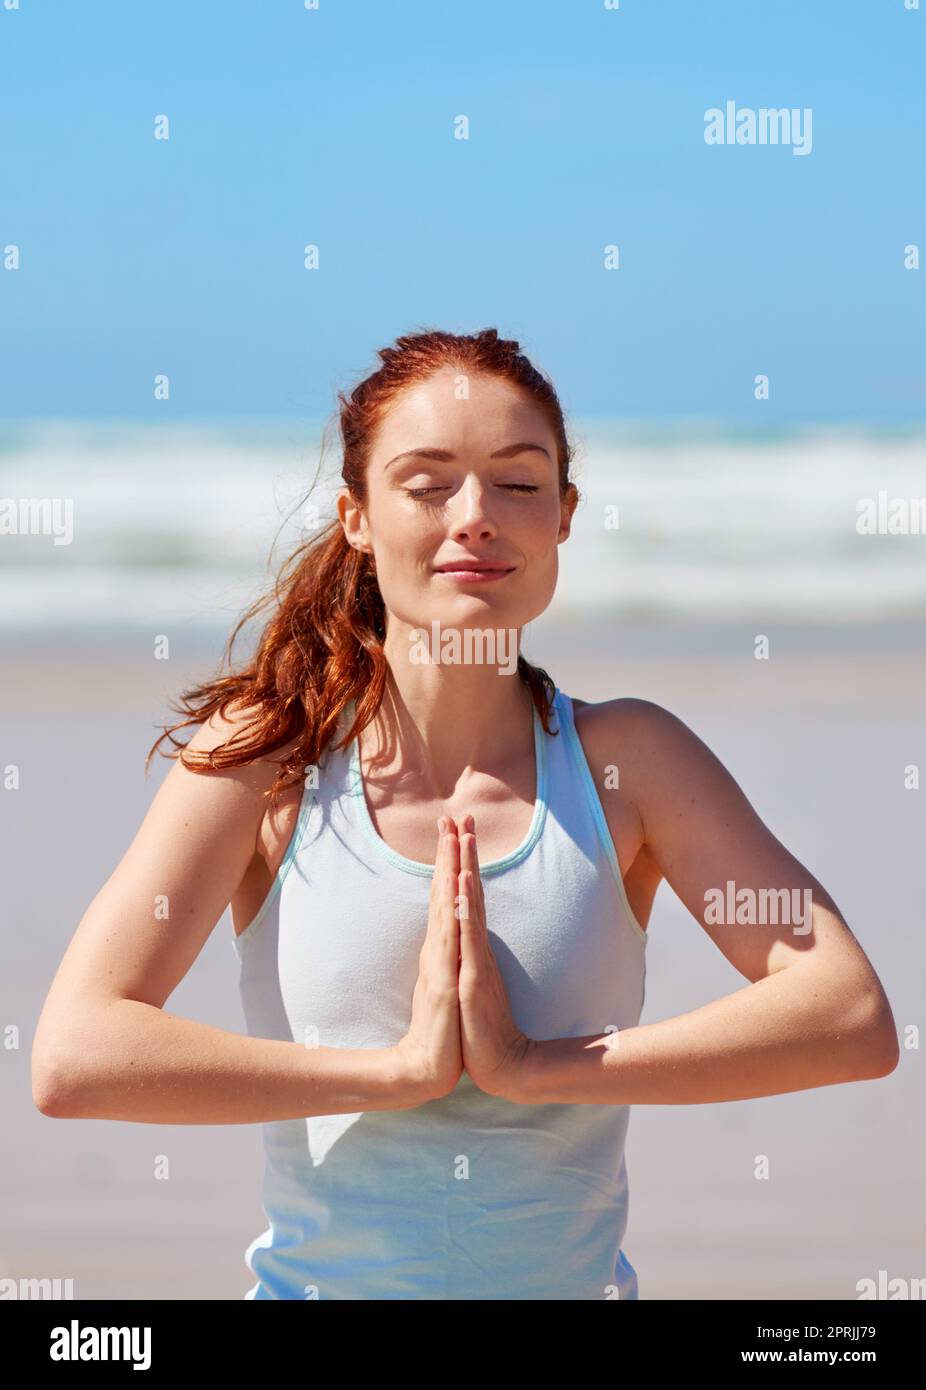 I meet myself in stillness, and we breathe. a young woman practicing her yoga routine at the beach. Stock Photo